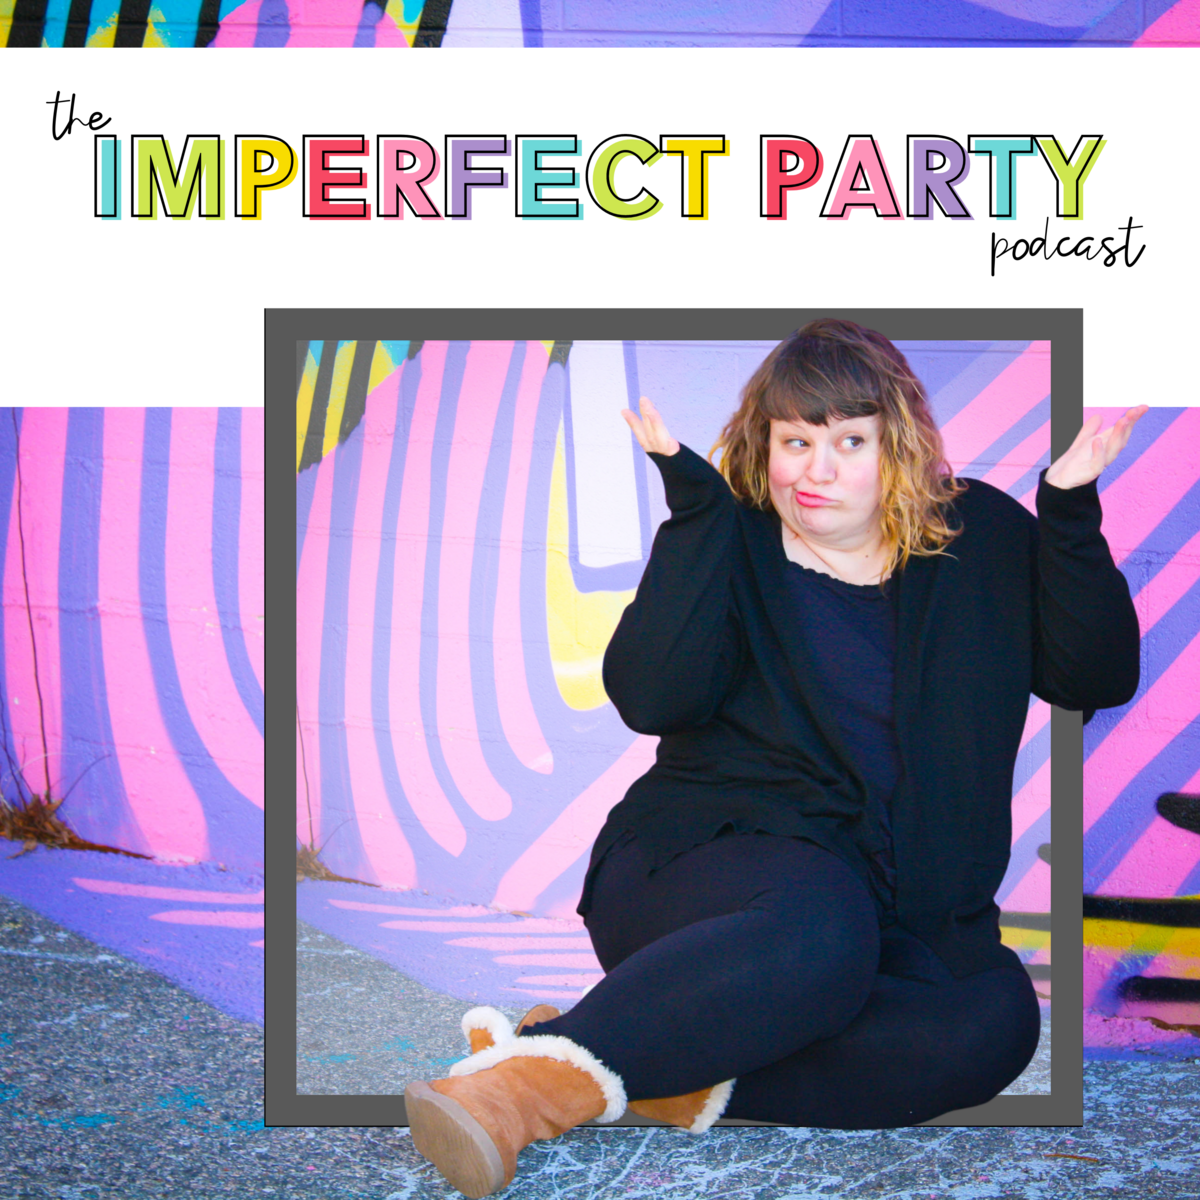 The Imperfect Party Podcast